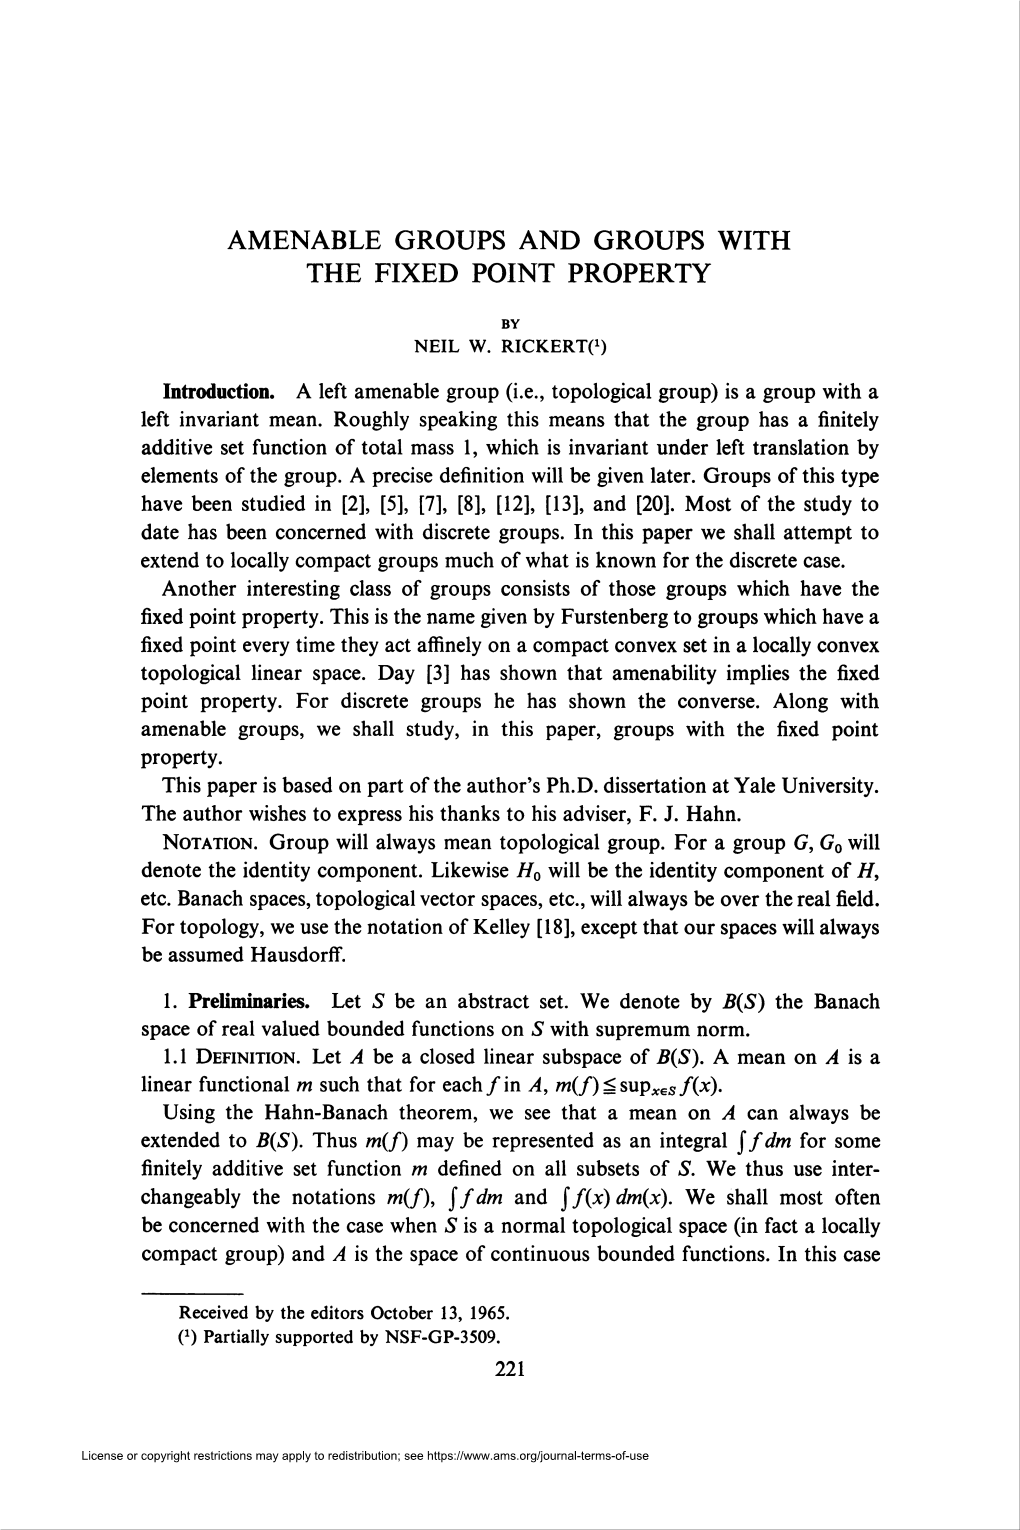 Amenable Groups and Groups with the Fixed Point Property